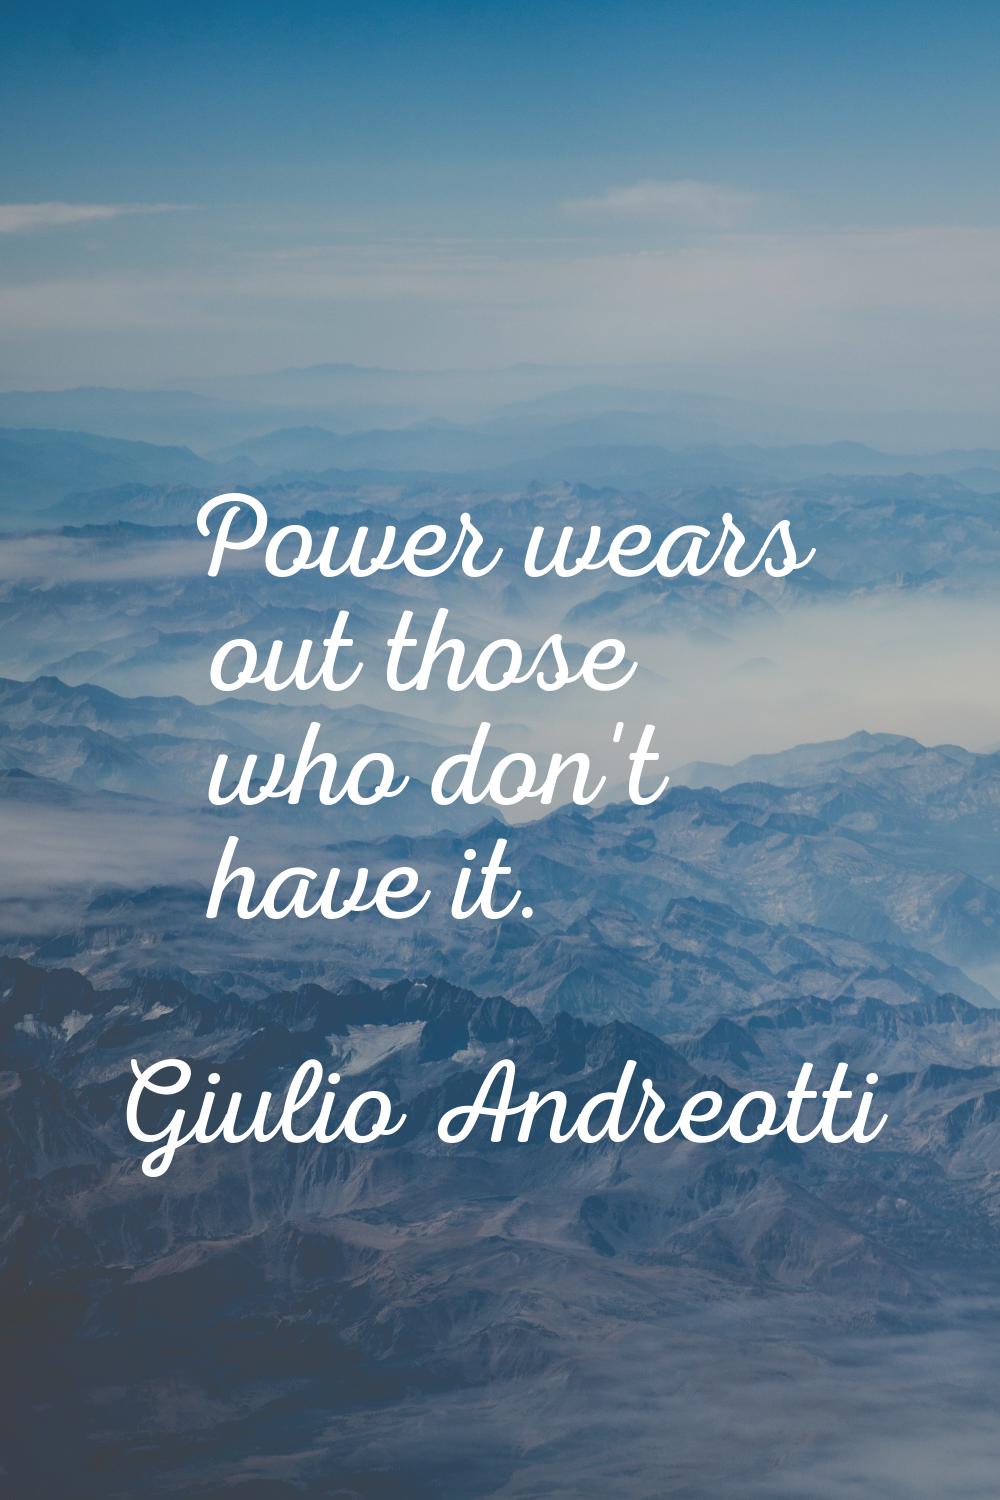 Power wears out those who don't have it.